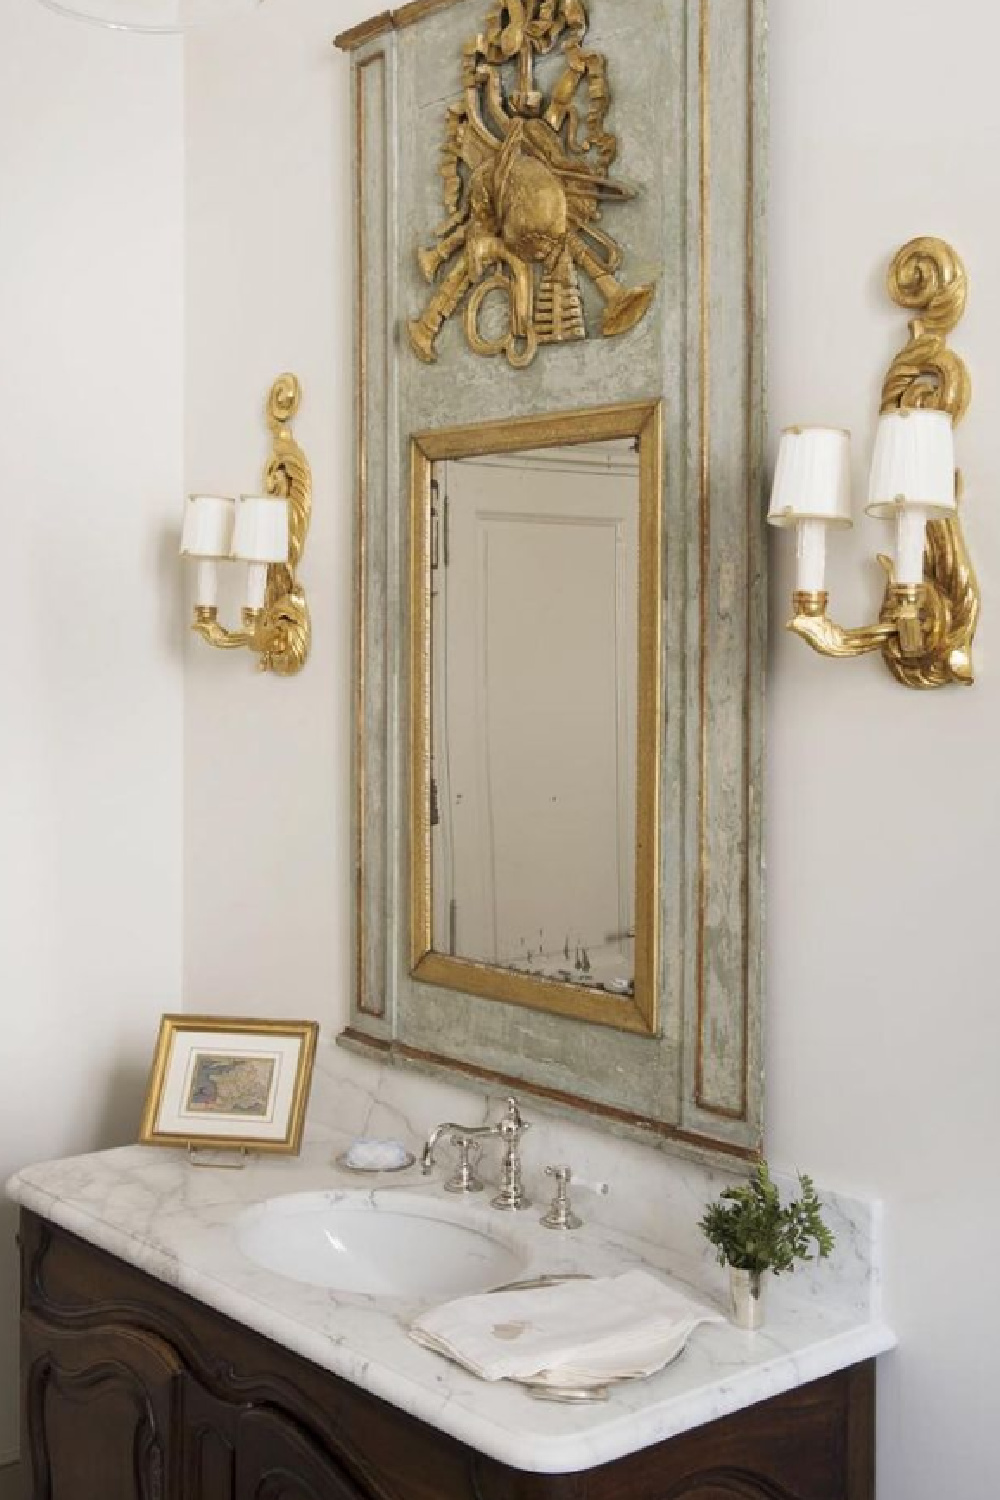 Elegant and luxurious French country bathroom in Provence - @provencepoirers. #frenchcountry #bathroomdecor #antiques #oldworldstyle #trumeau #provencestyle #interiordesign